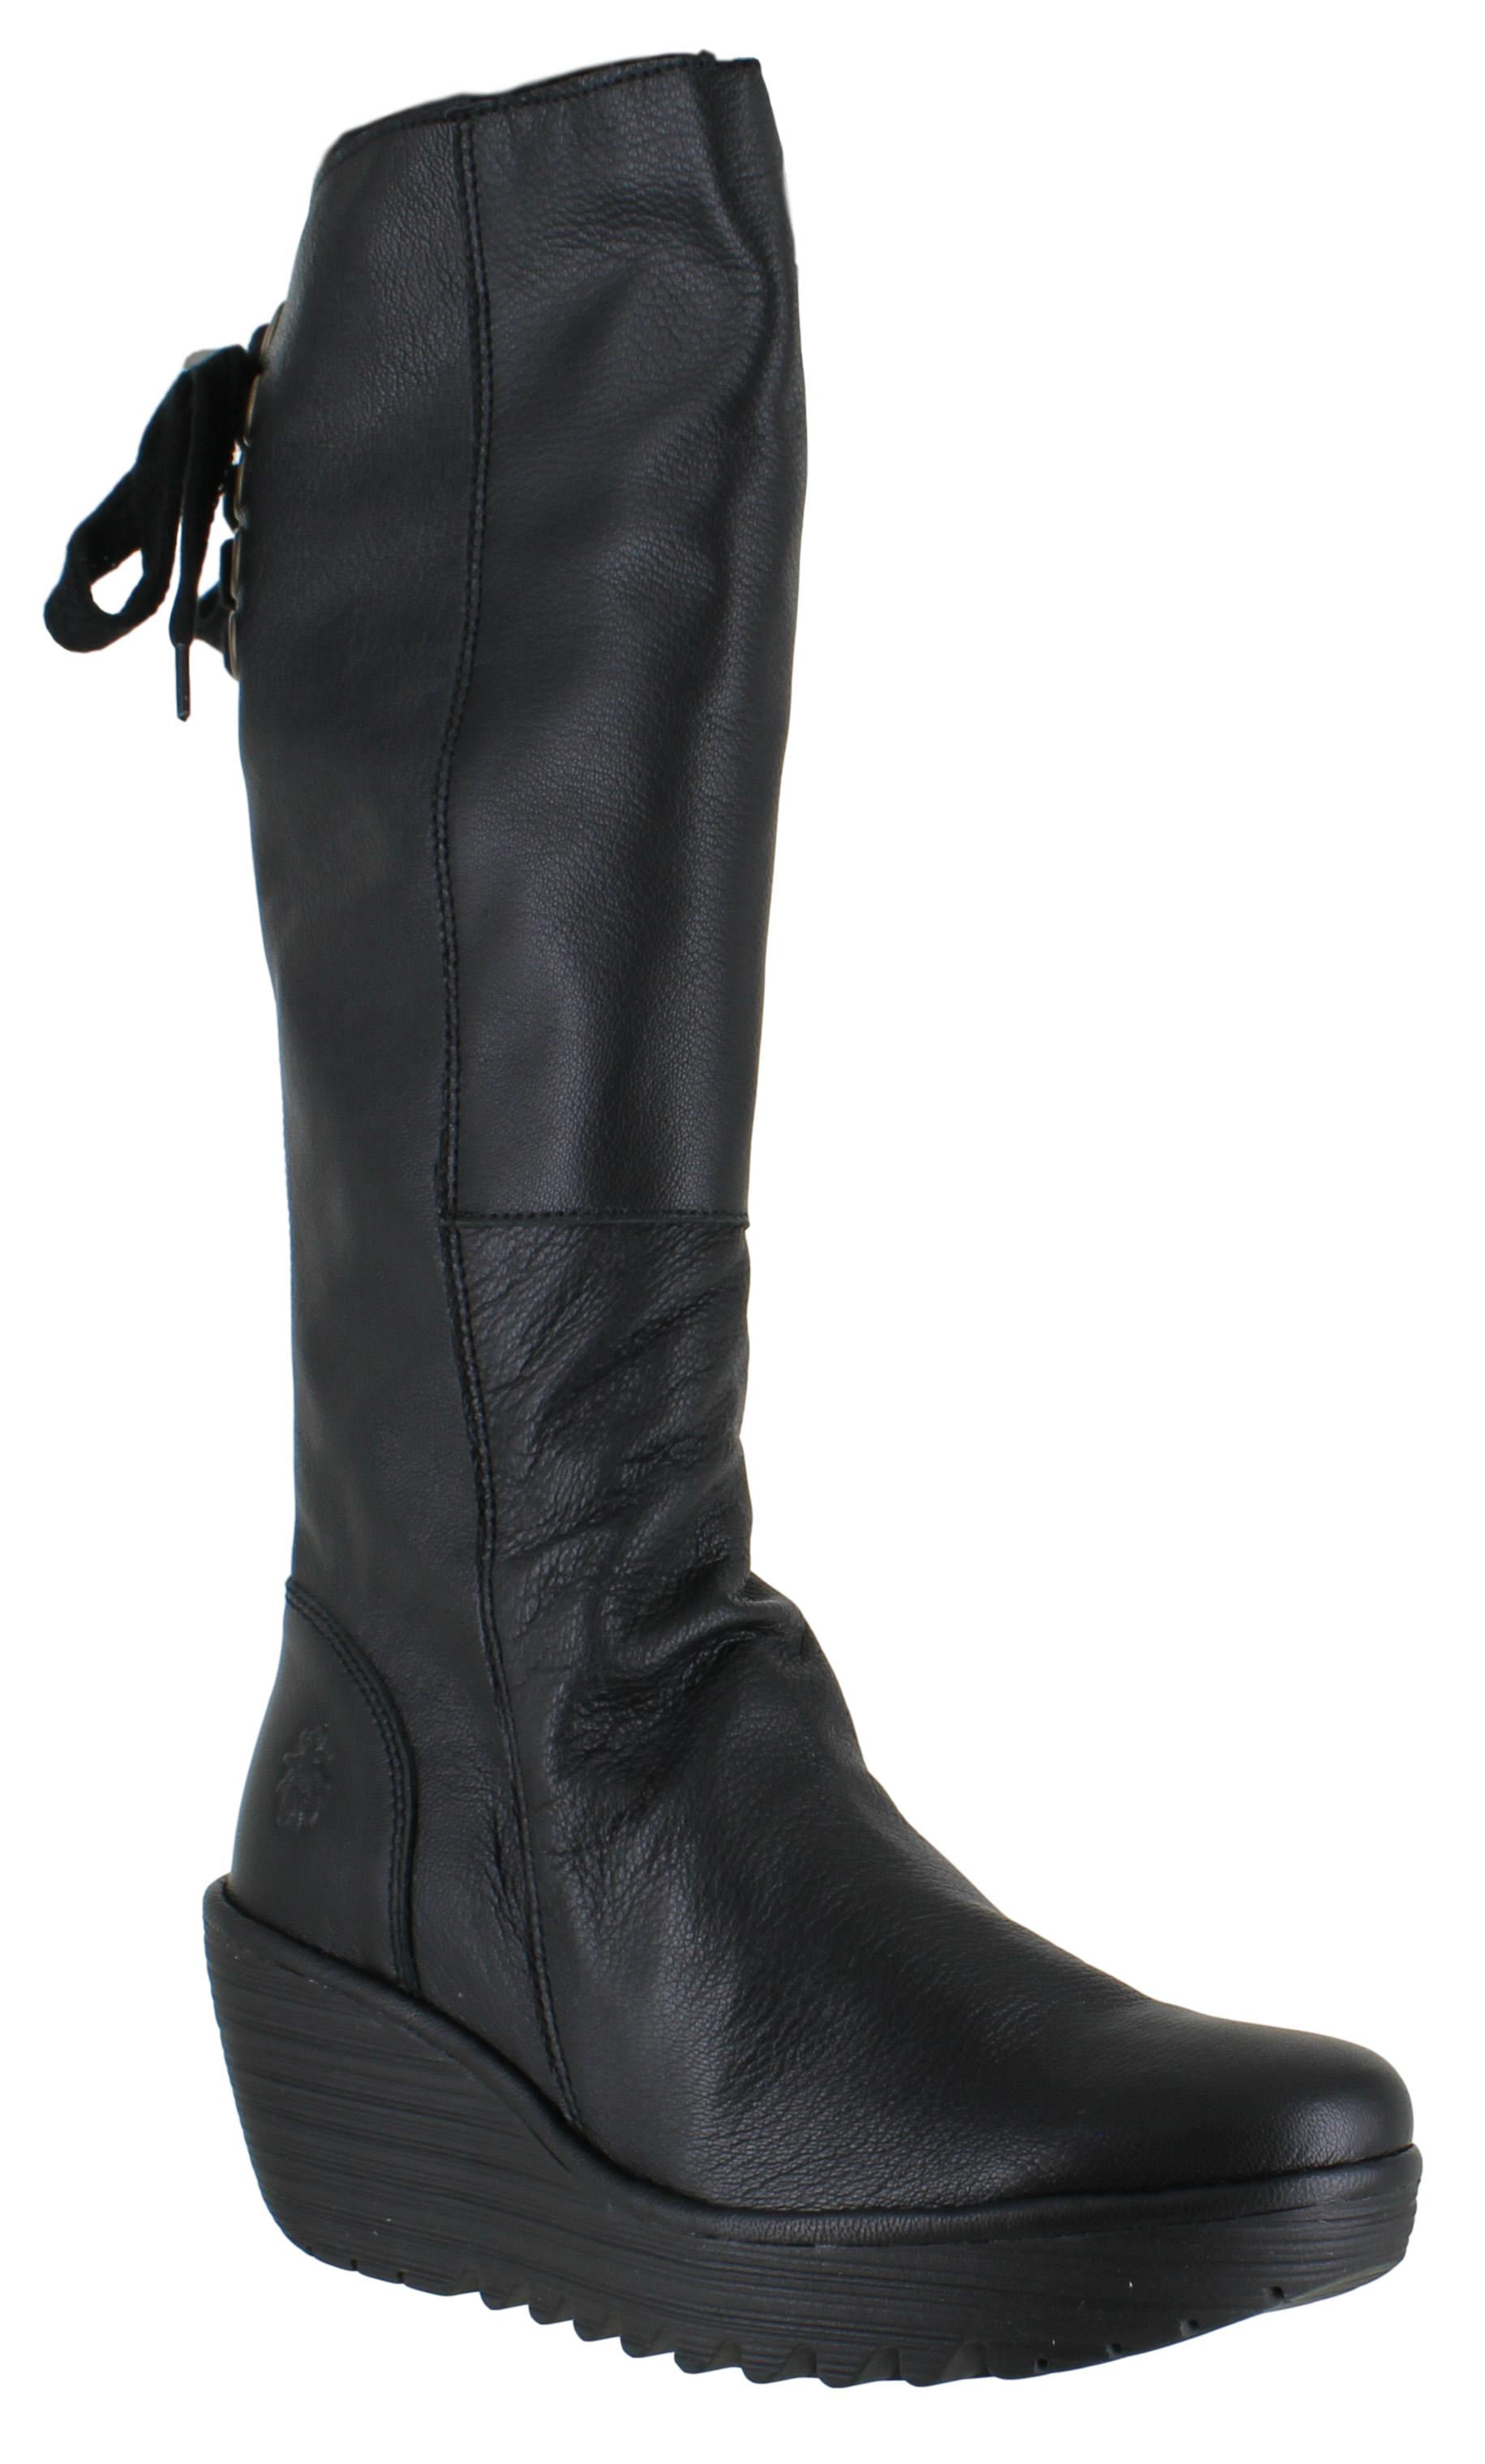 Womens Fly London Yust Wedged Heeled High Leather Zip Up Boots Sizes 4